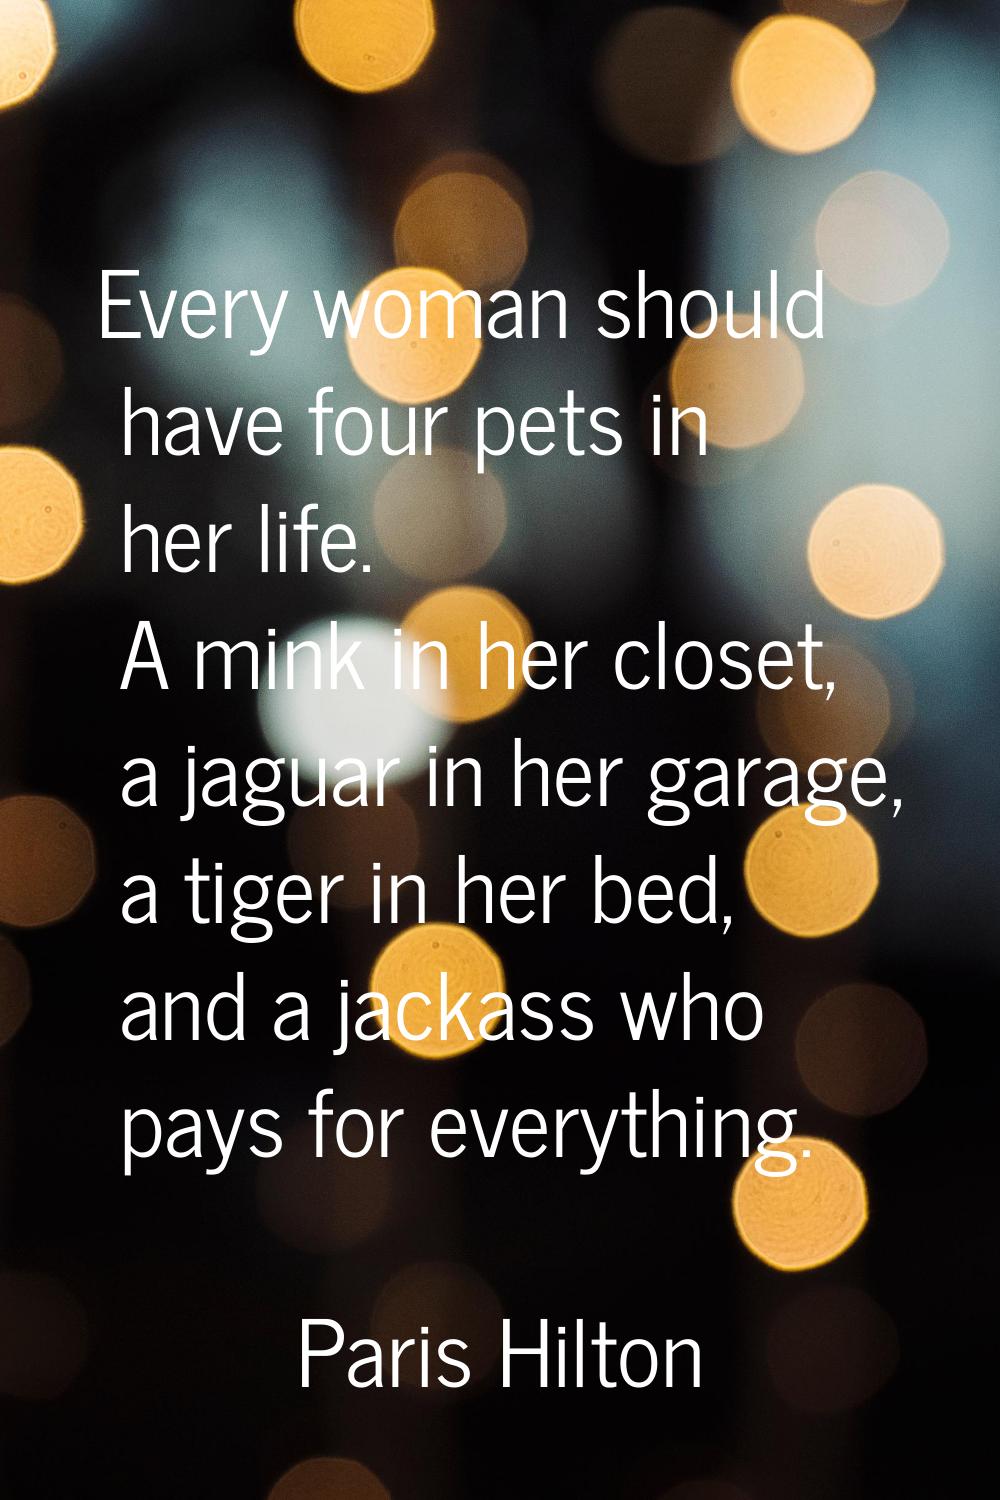 Every woman should have four pets in her life. A mink in her closet, a jaguar in her garage, a tige